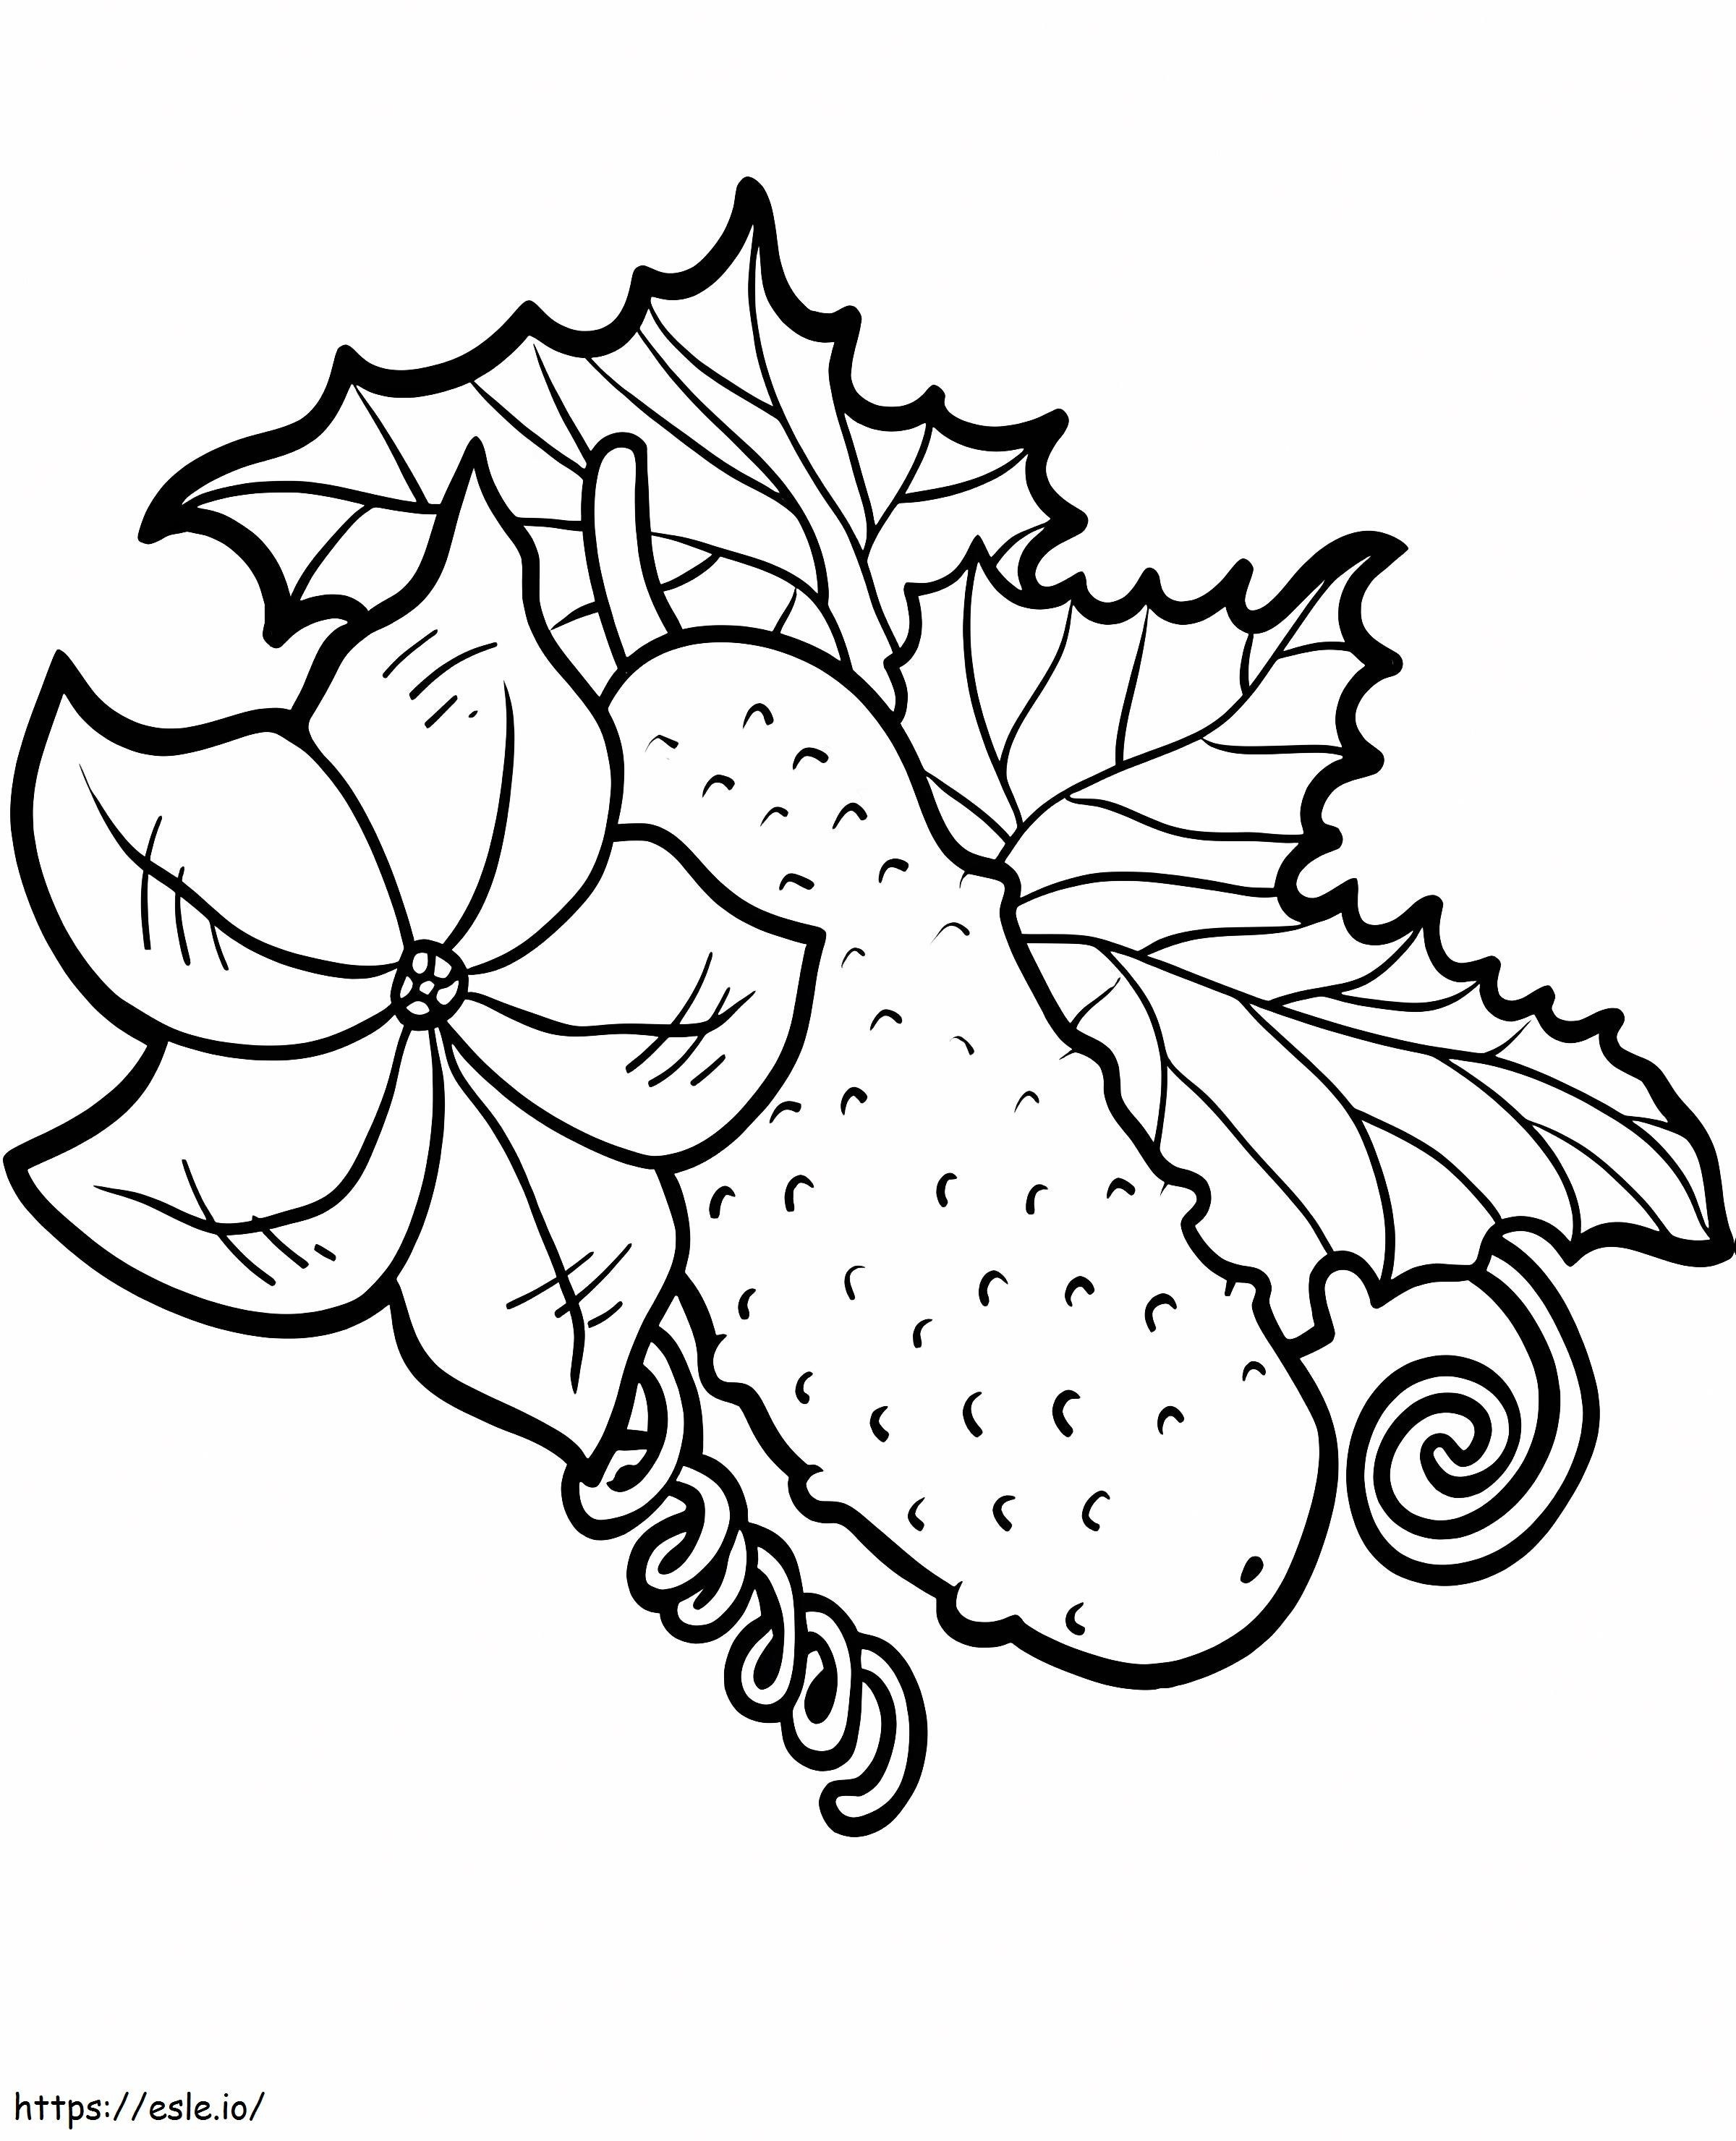 Cucumber With Flower And Leaves coloring page